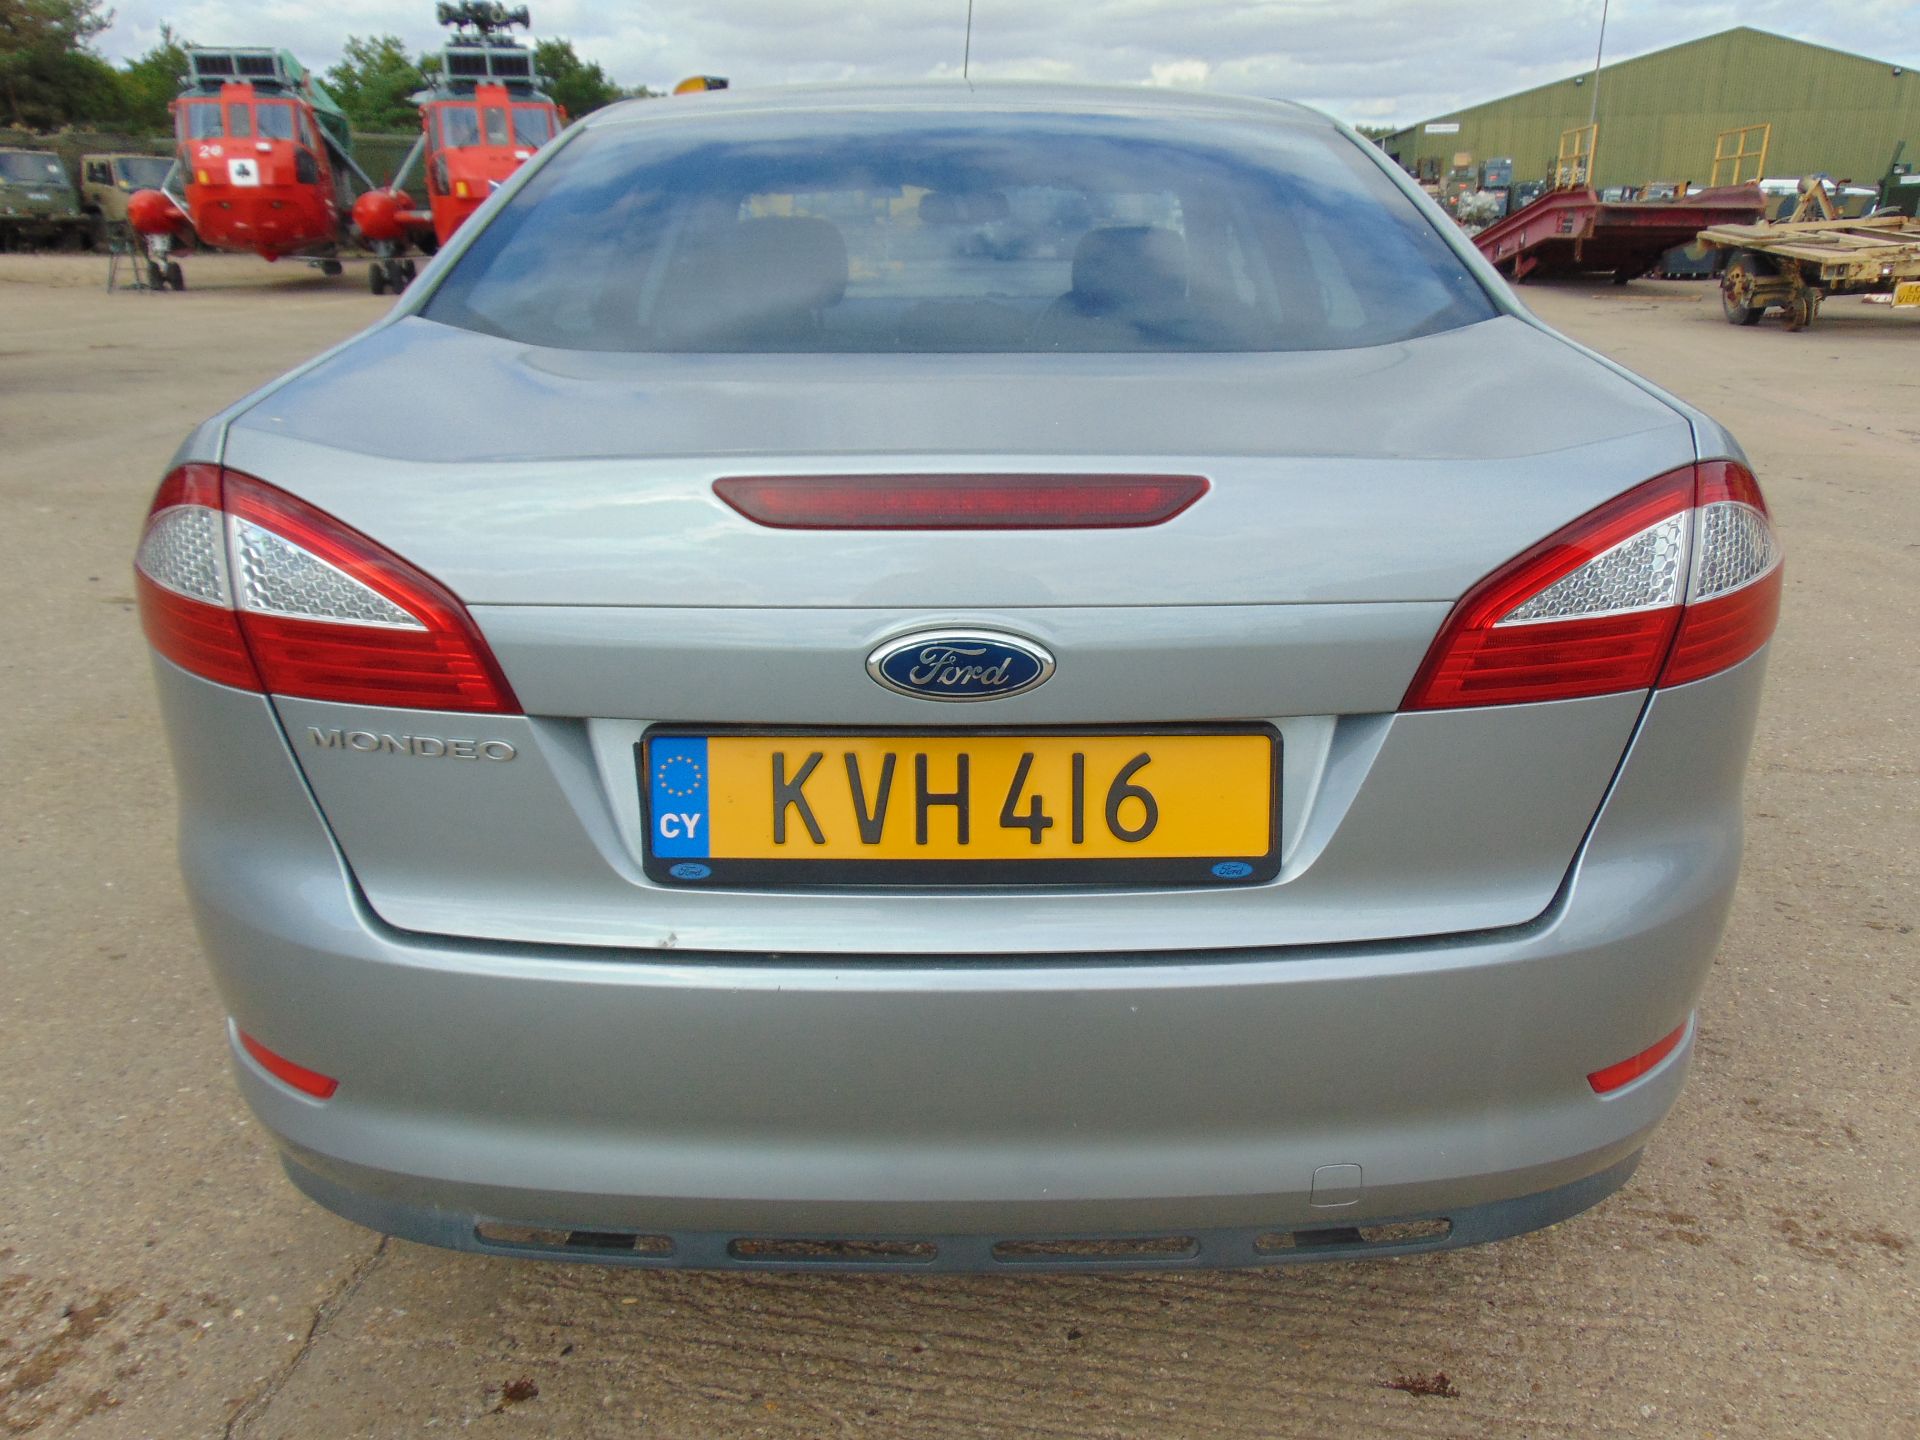 Ford Mondeo 2.5L Turbo Saloon - Image 7 of 19